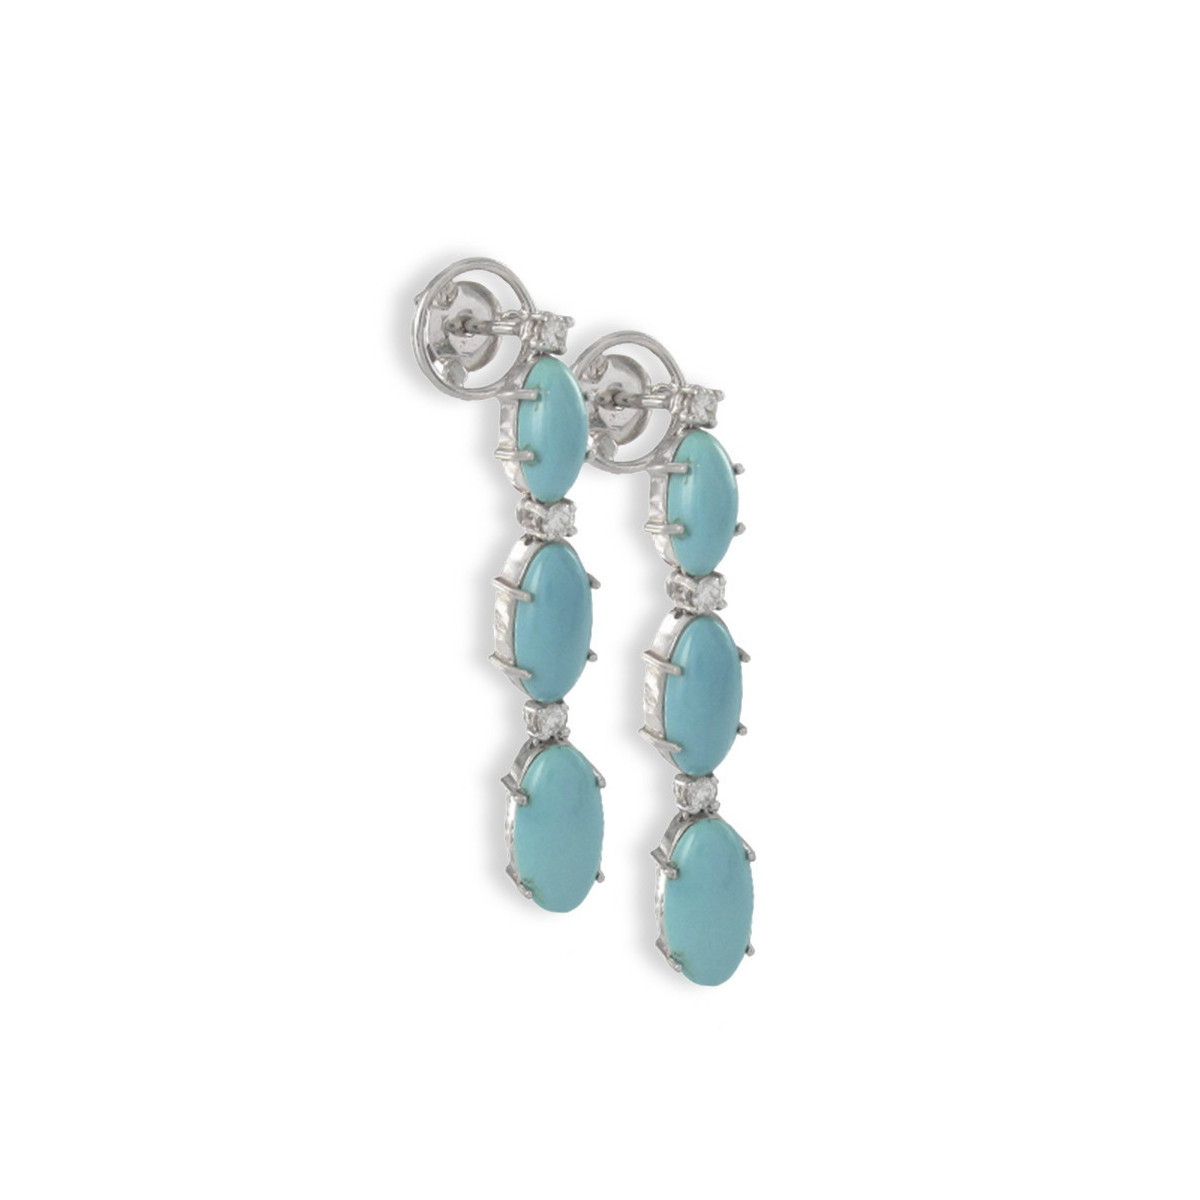 GOLD DIAMOND AND TURQUOISE EARINGS